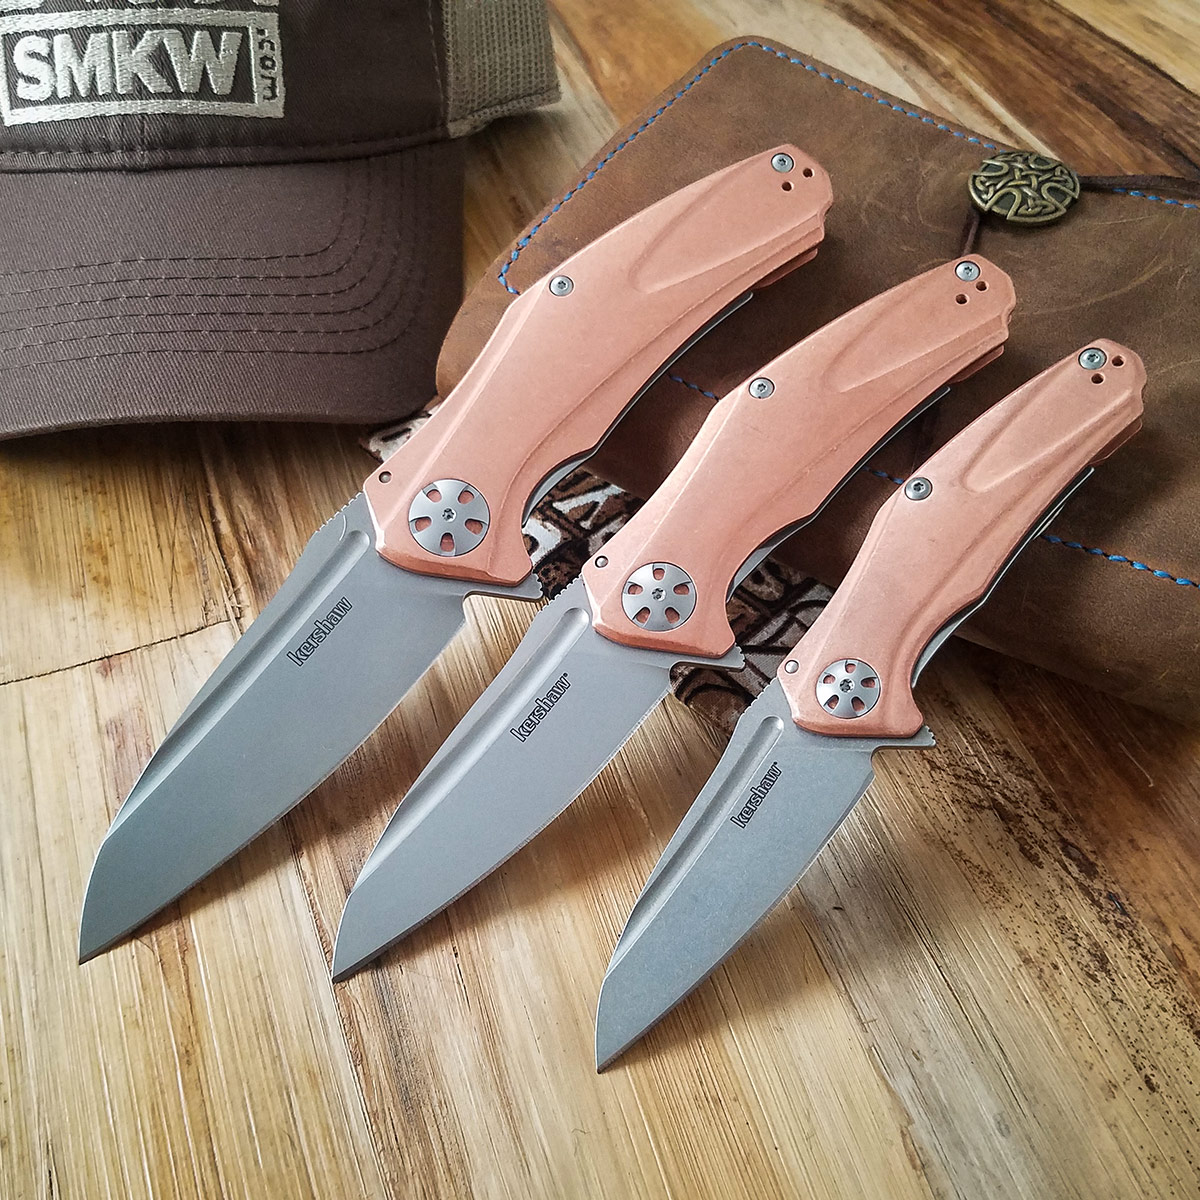 Andrew Halliday Kor uvidenhed Taking the measure of the Kershaw Copper Natrix – Knife Newsroom